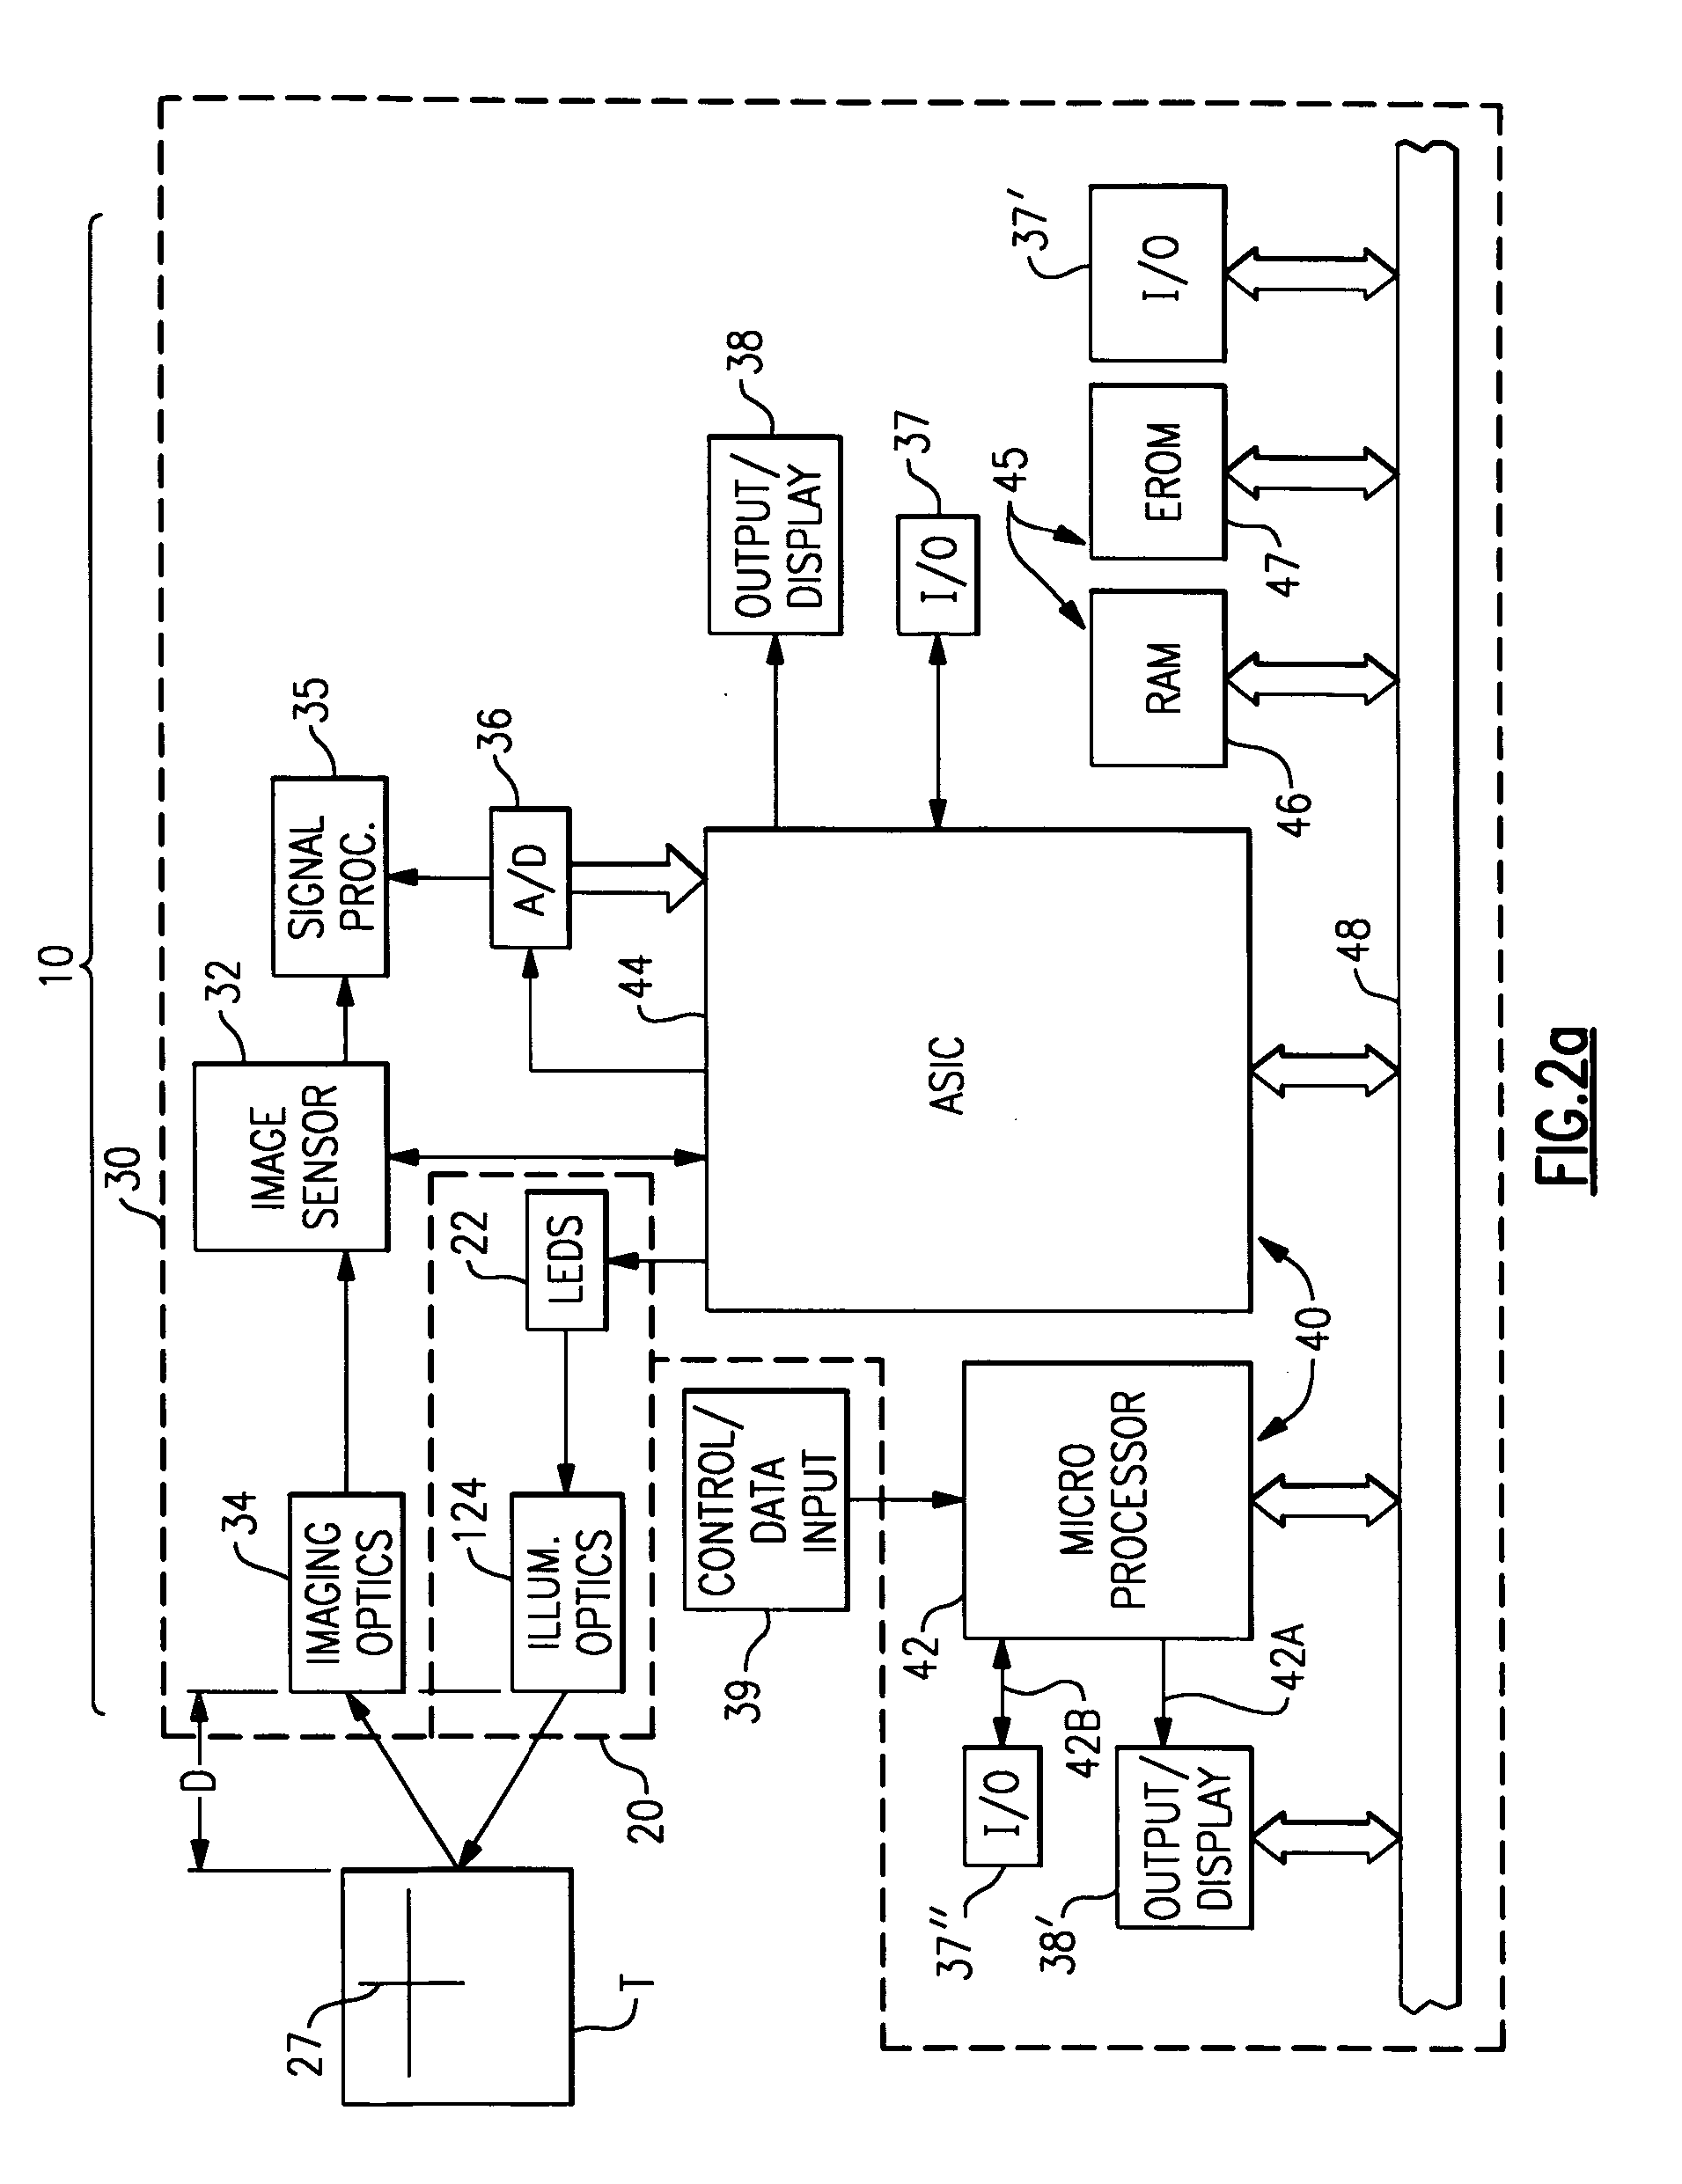 Bar code reading device having partial frame image capture operating mode